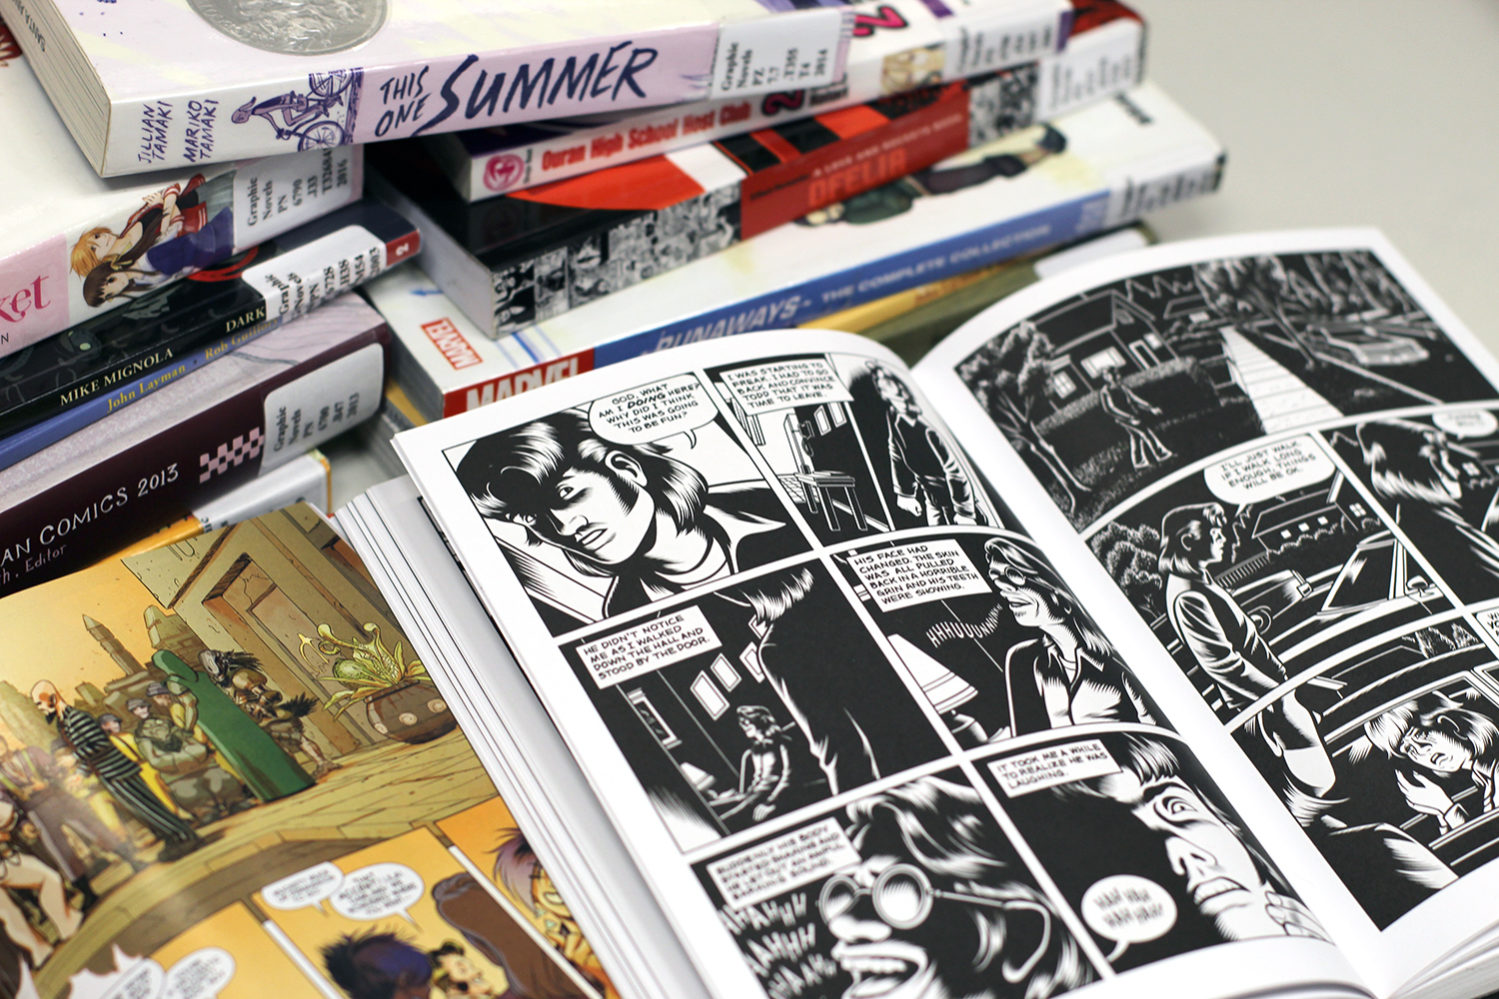 Graphic-novels-nealley-library-web